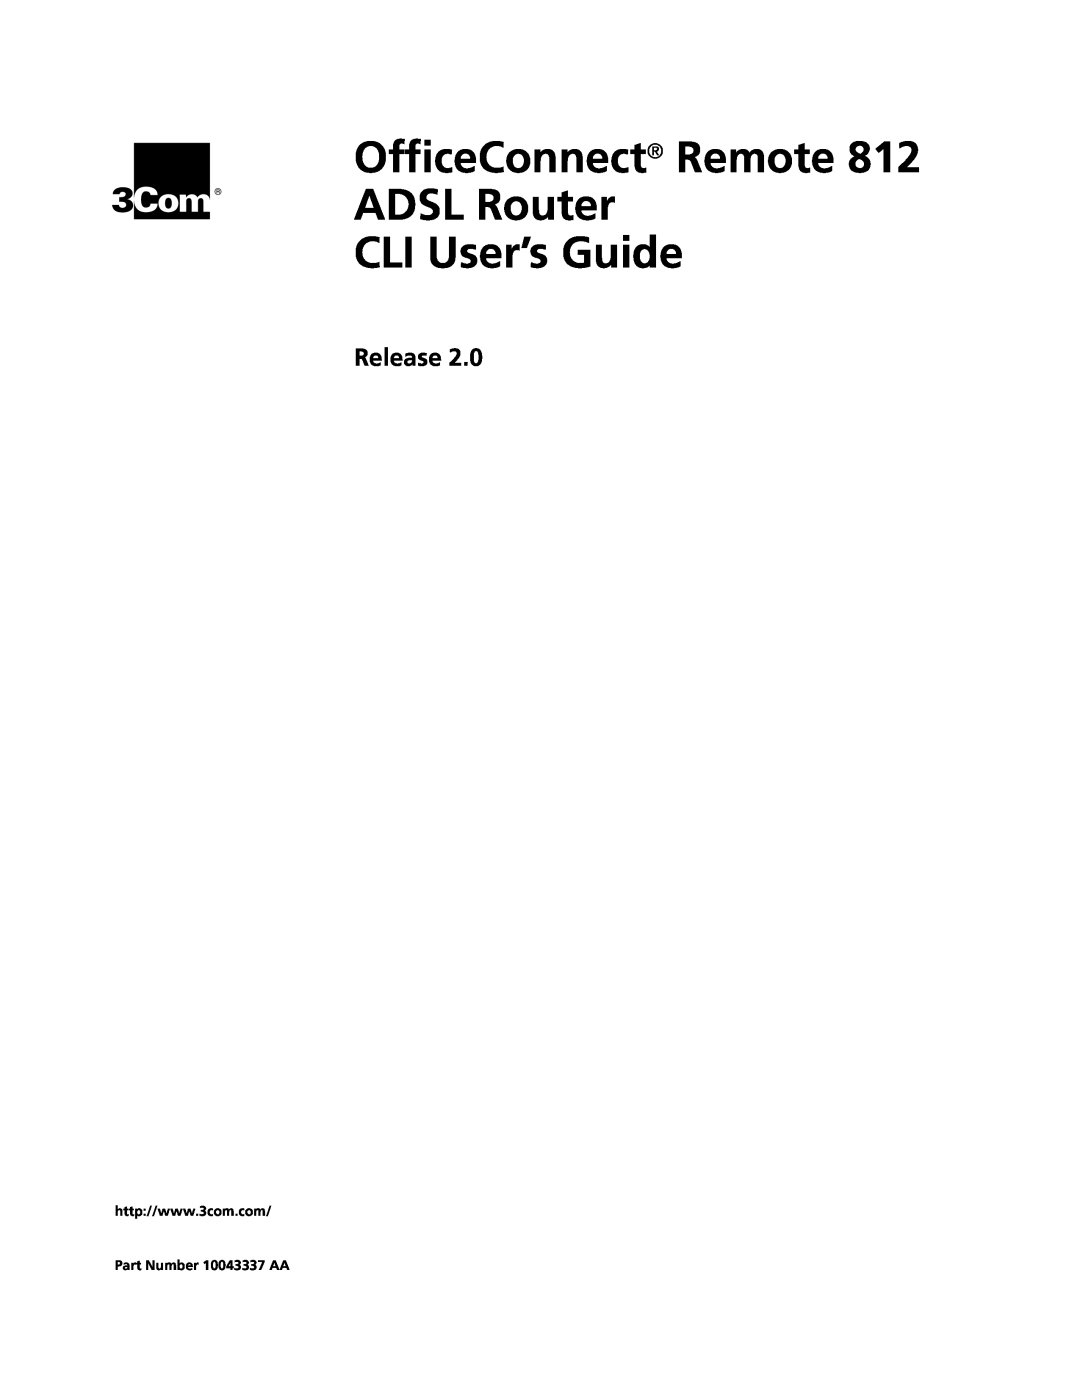 3Com OfficeConnect Remote 812 manual Release, OfficeConnect Remote ADSL Router CLI User’s Guide, Part Number 10043337 AA 